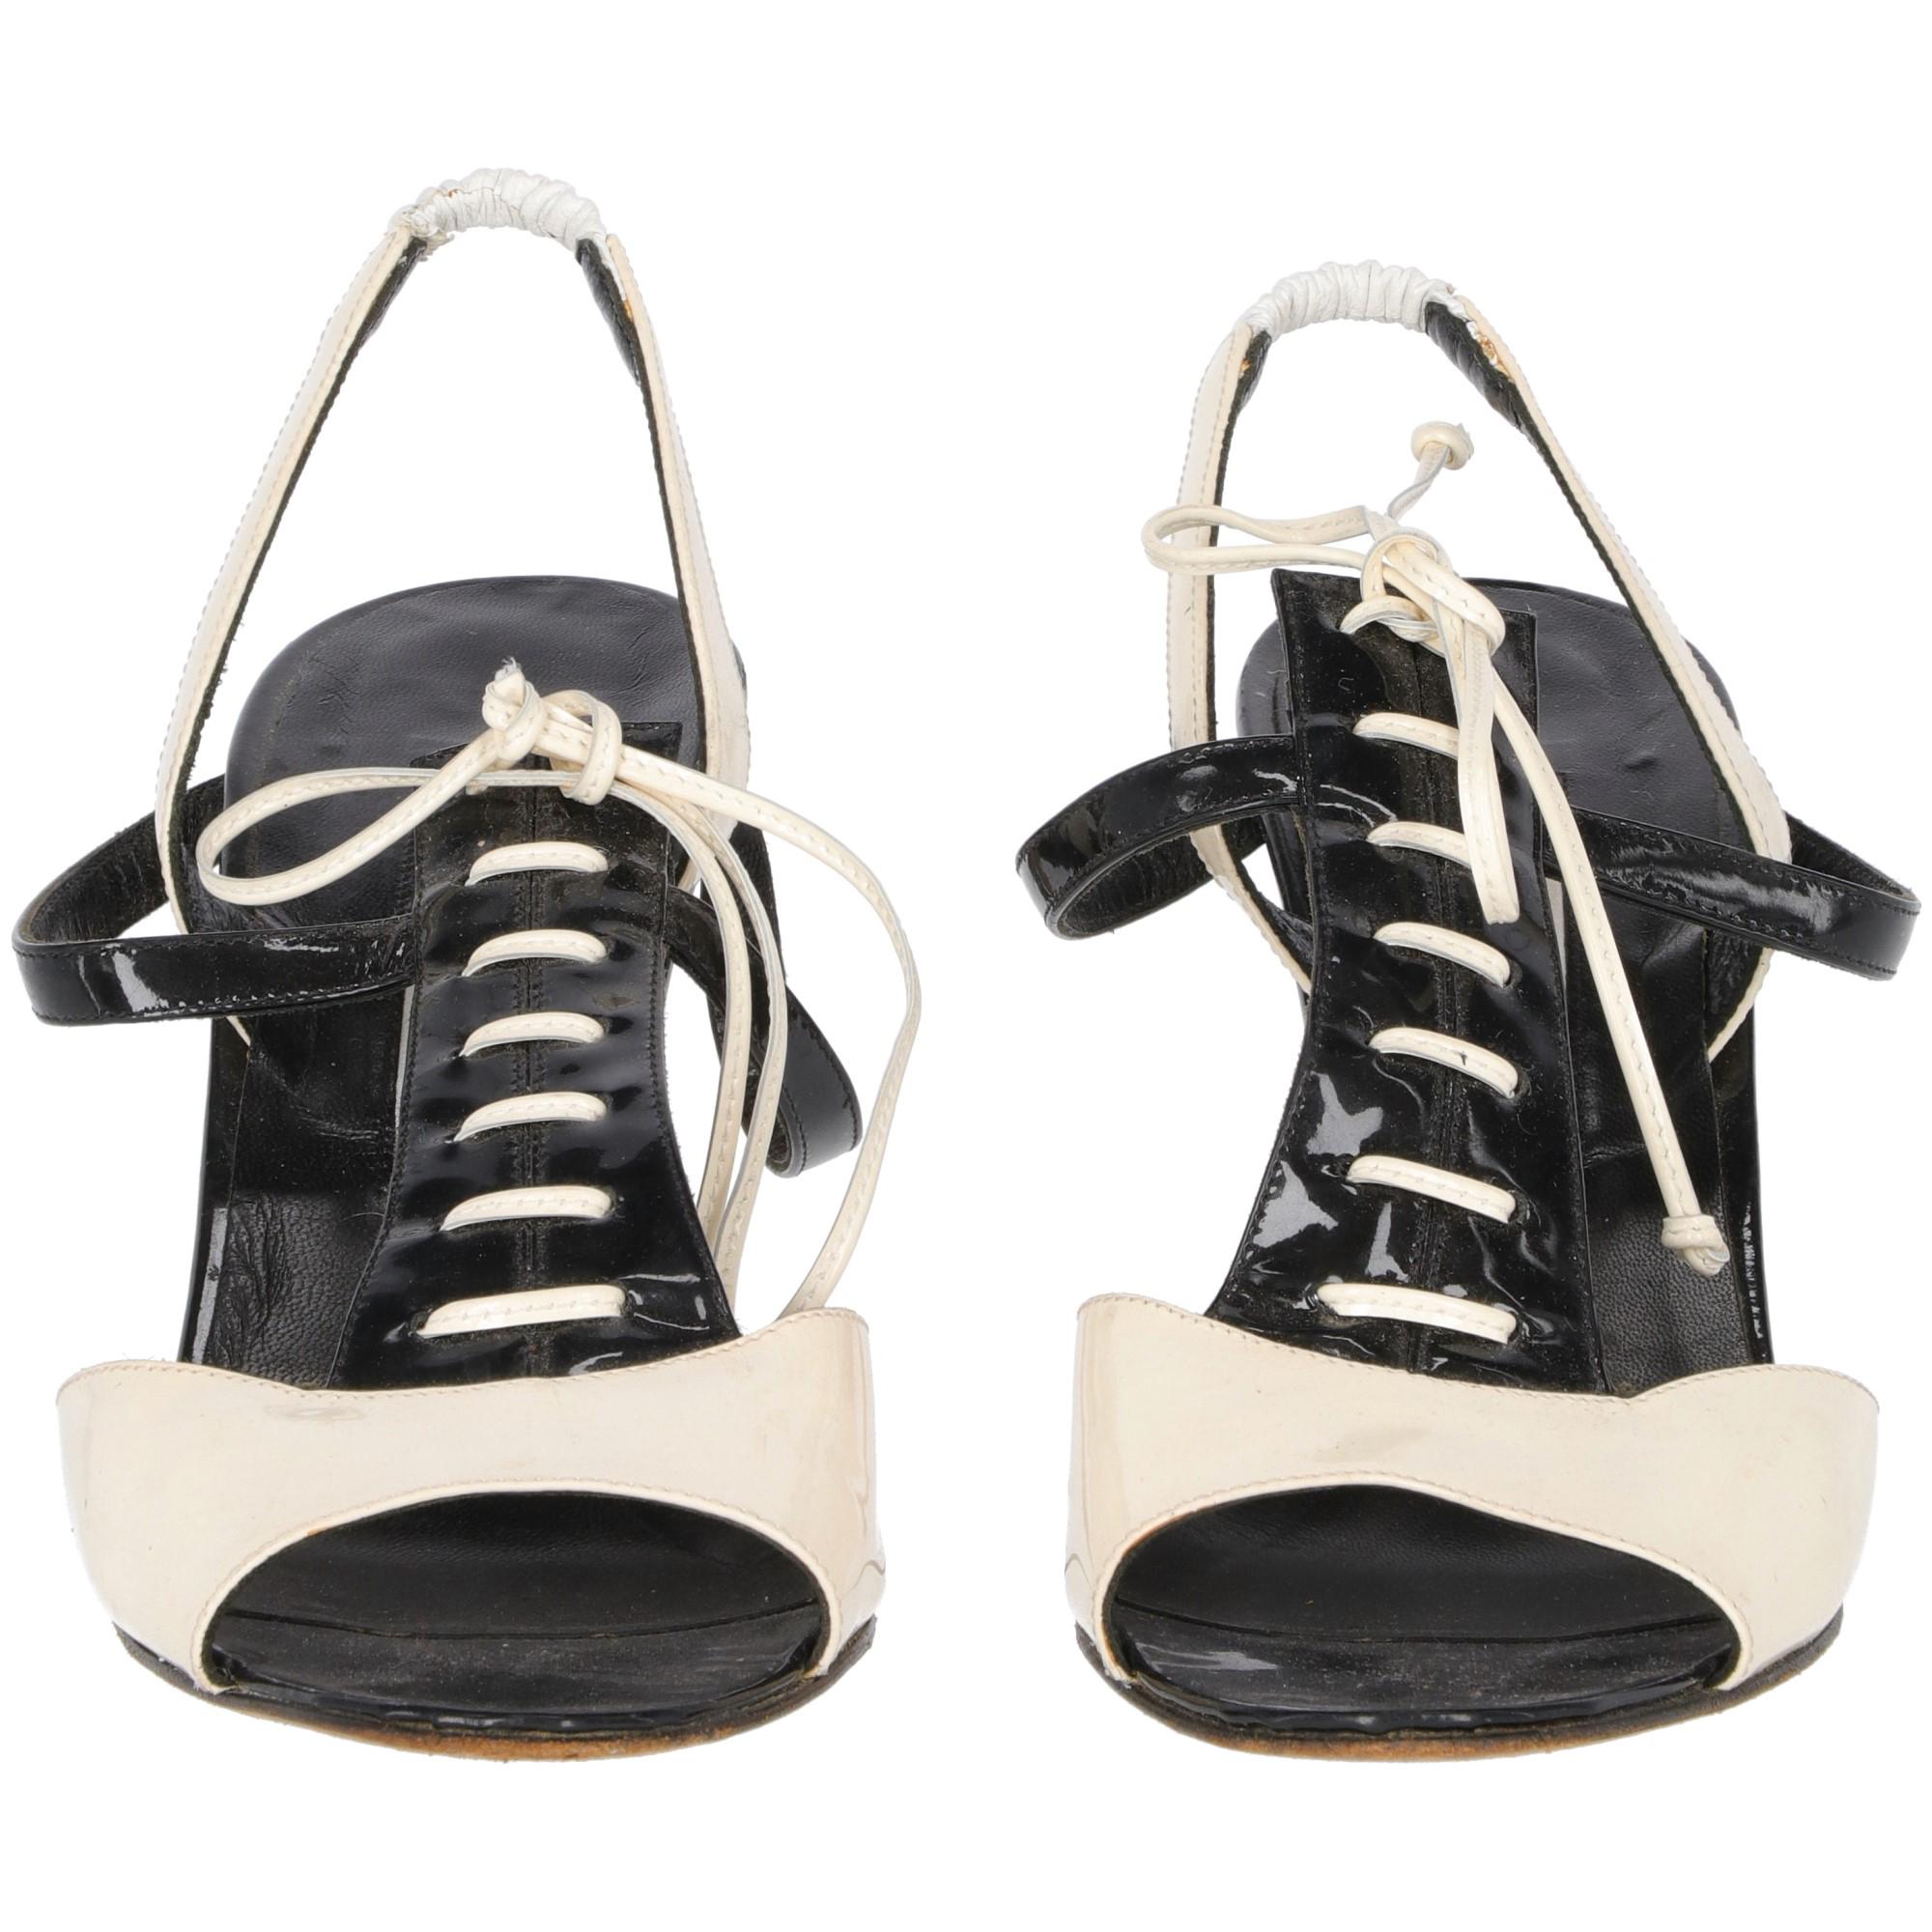 Sophisticated Manolo Blahnik bicolor ivory and black patent leather slingback sandals with an elasticated insert in optical white real leather. These bontone style shoes features a black patent leather detail, faux leather lace-up and bow. Black